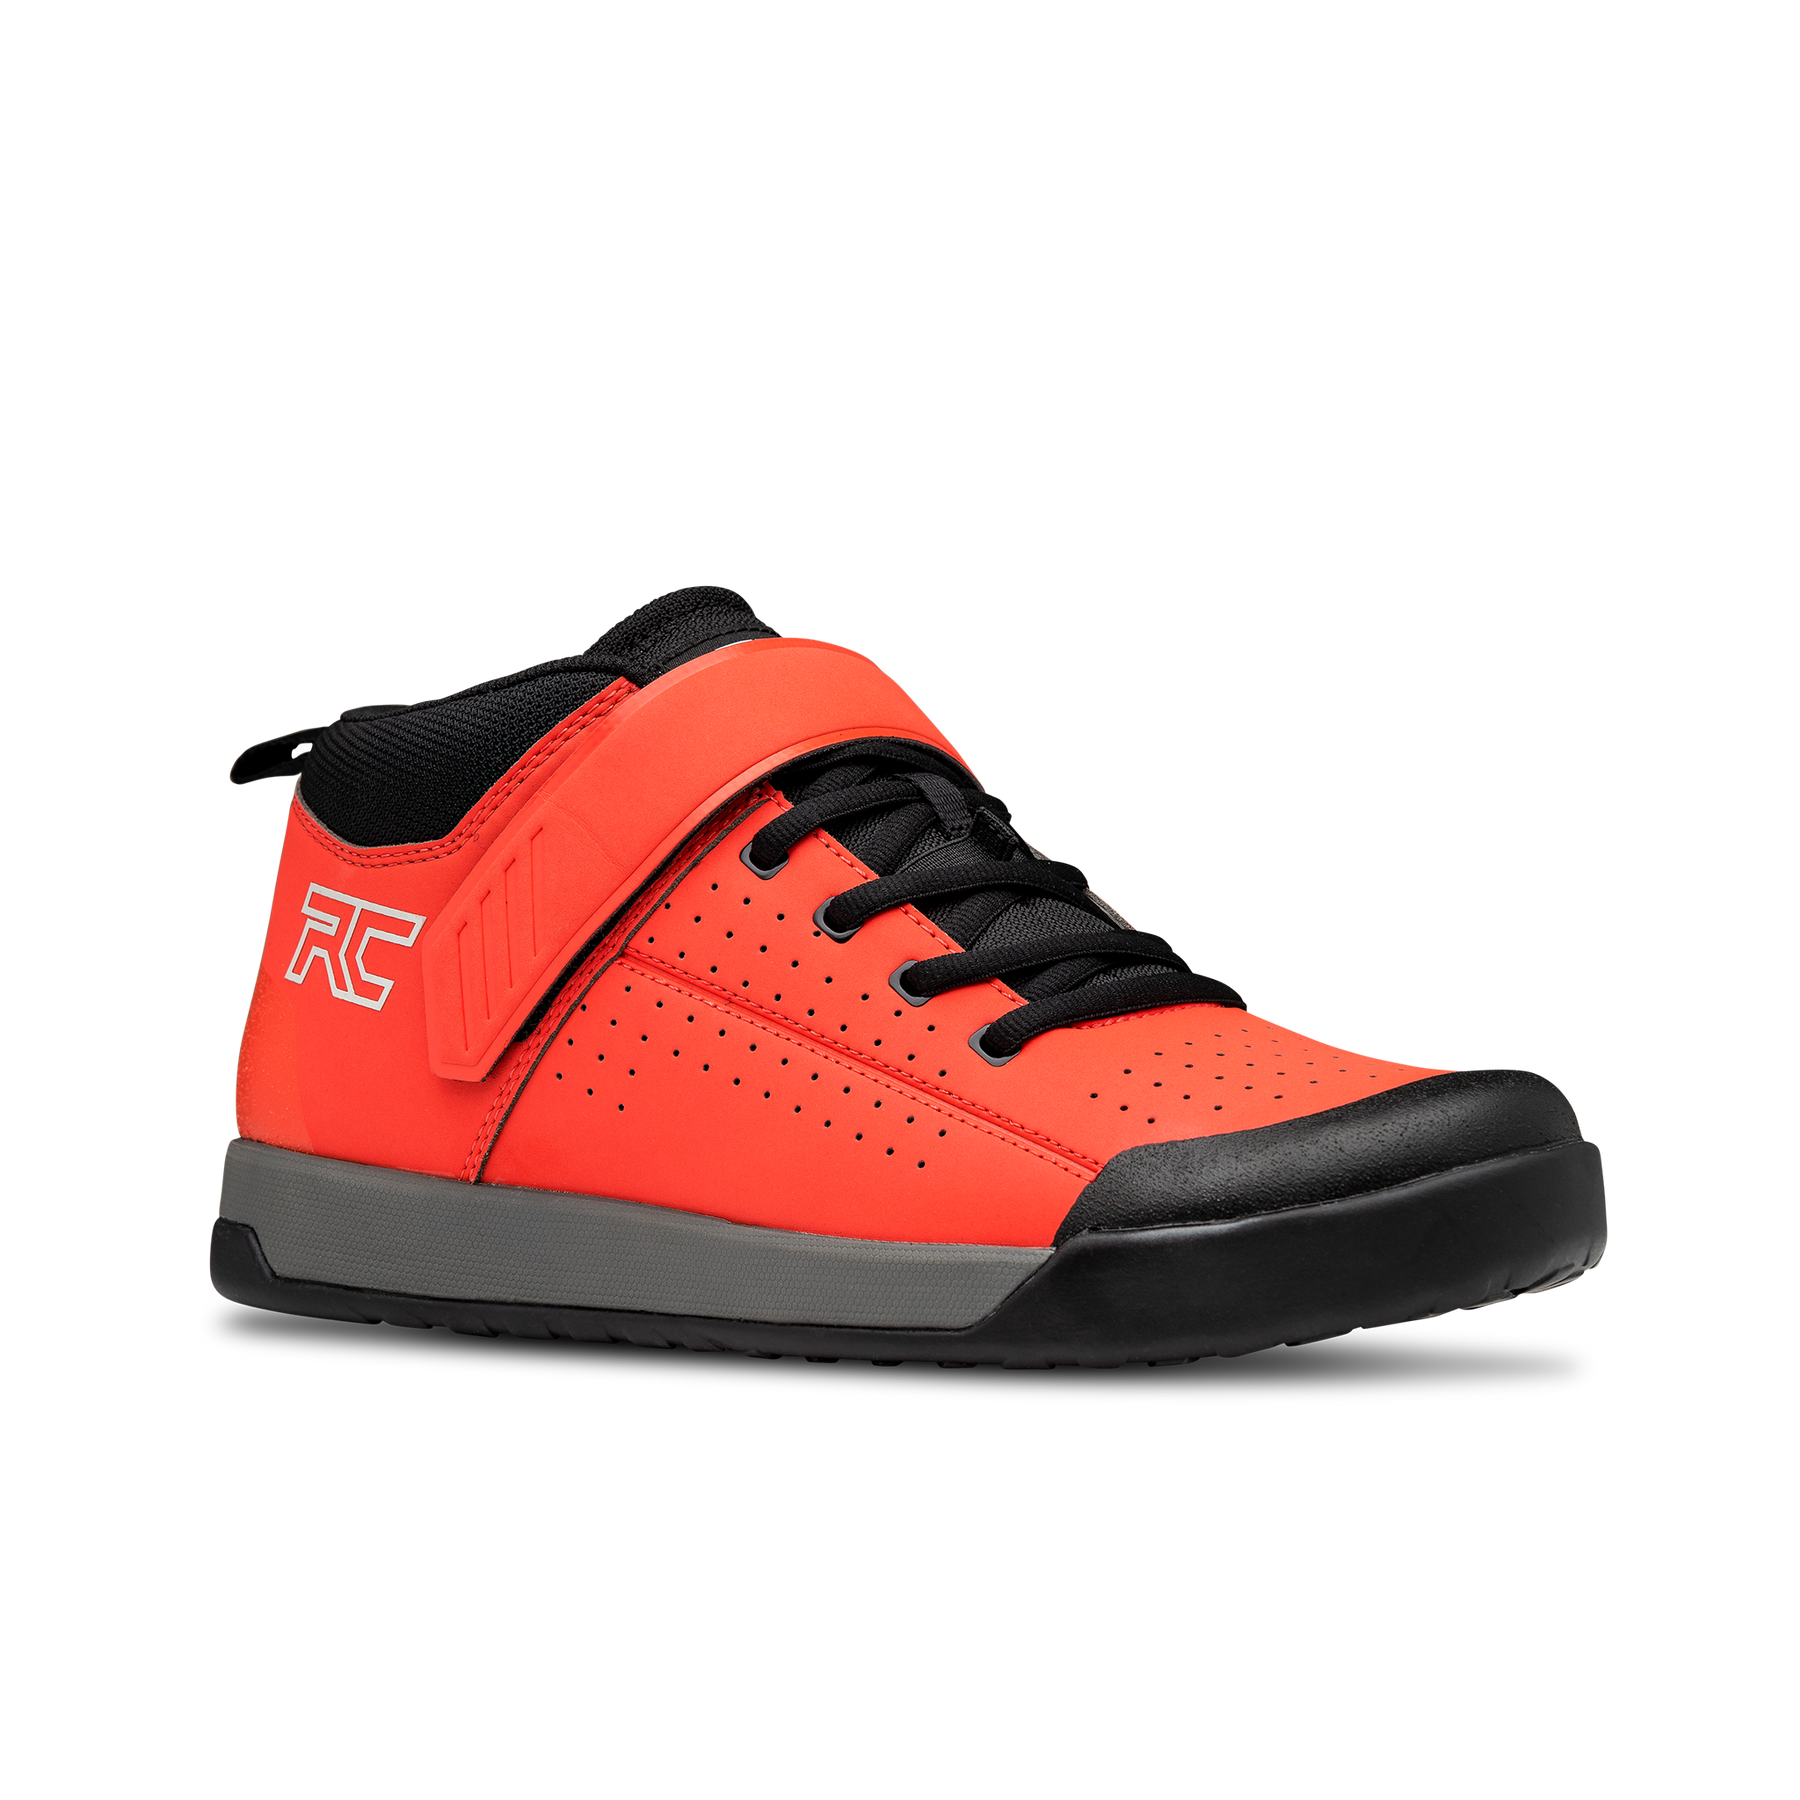 Shop 2nd D1 Ride Concepts Wildcat Flat Shoes - US 10.0 - Red - Image 1